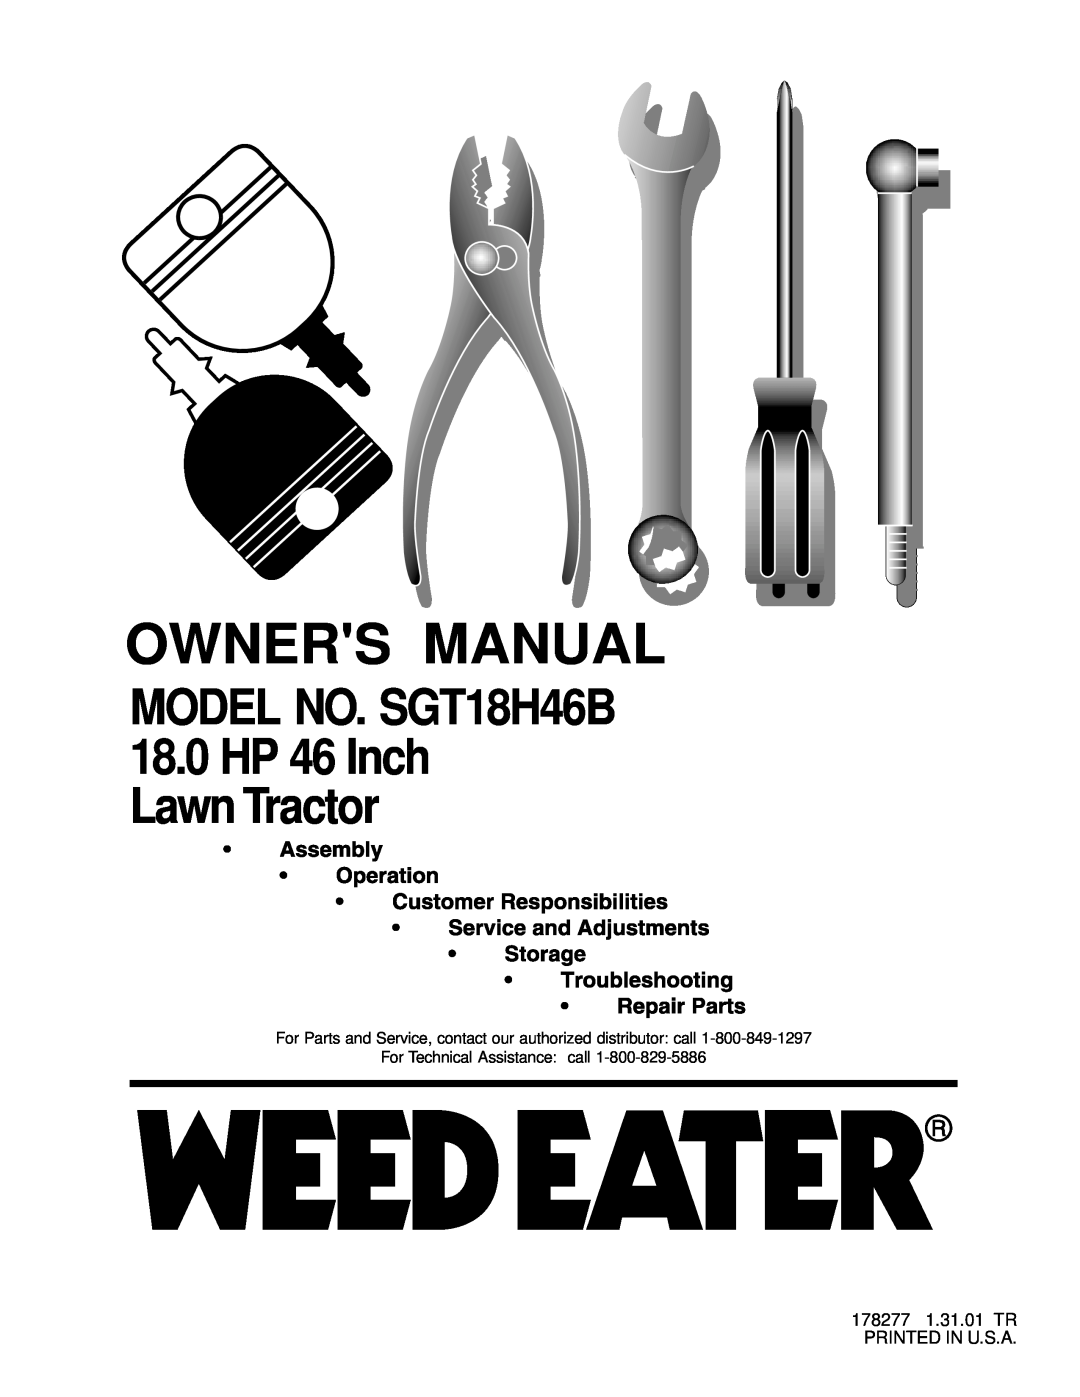 Weed Eater 178277 owner manual Owners Manual, MODEL NO. SGT18H46B 18.0 HP 46 Inch Lawn Tractor 